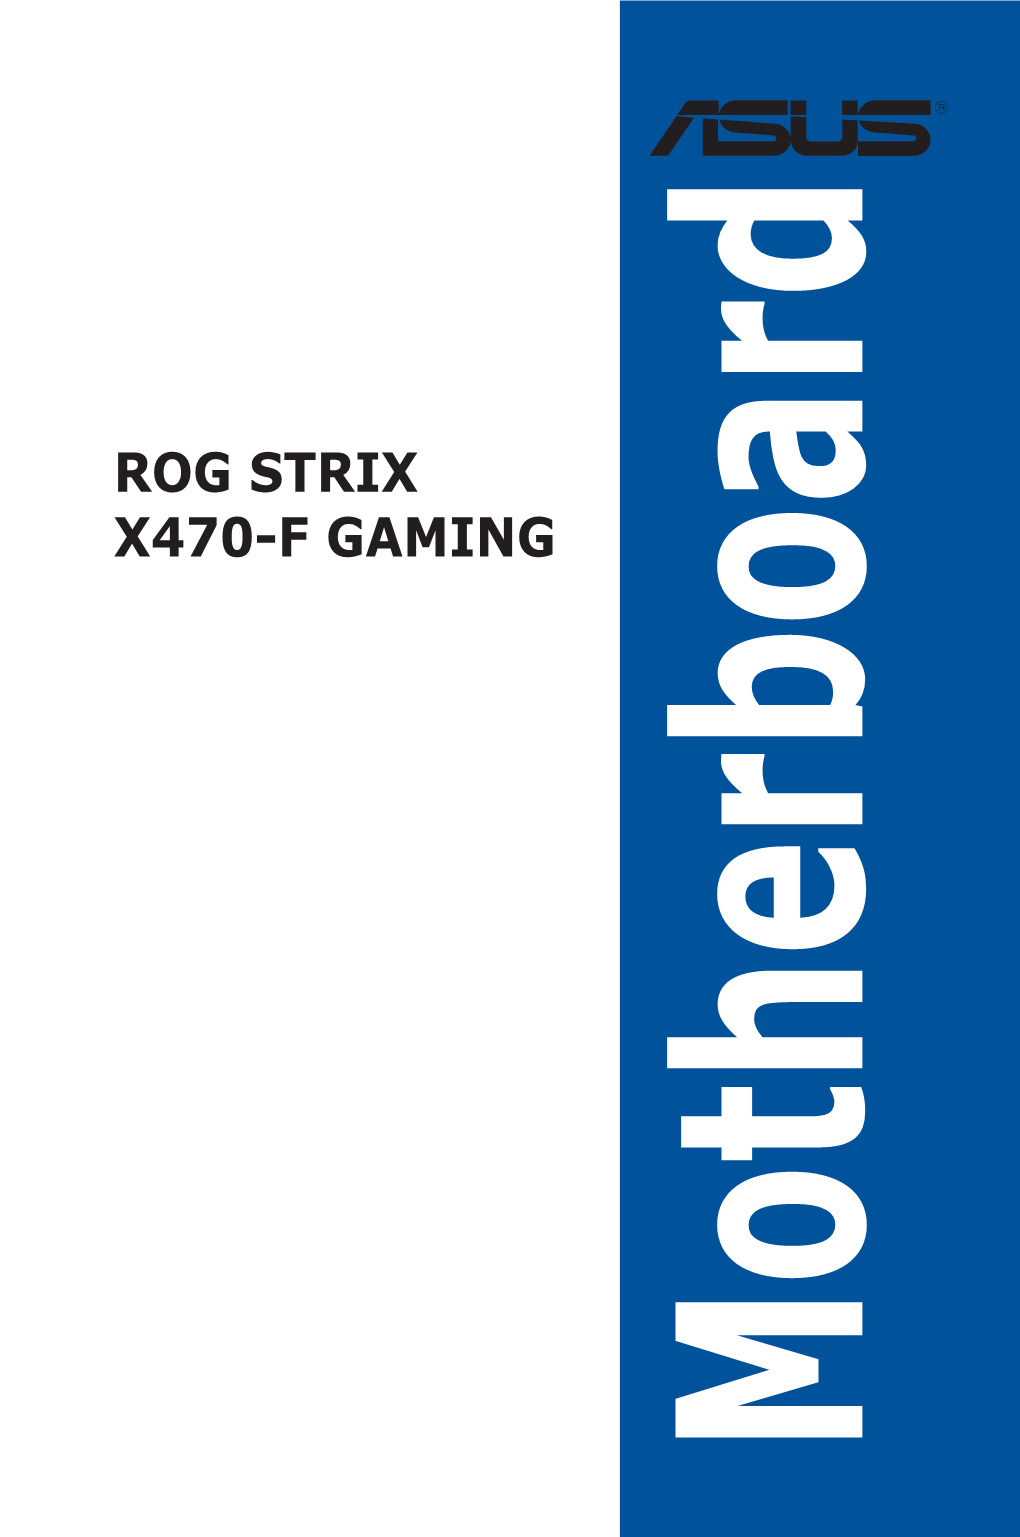 ROG STRIX X470-F GAMING Specifications Summary